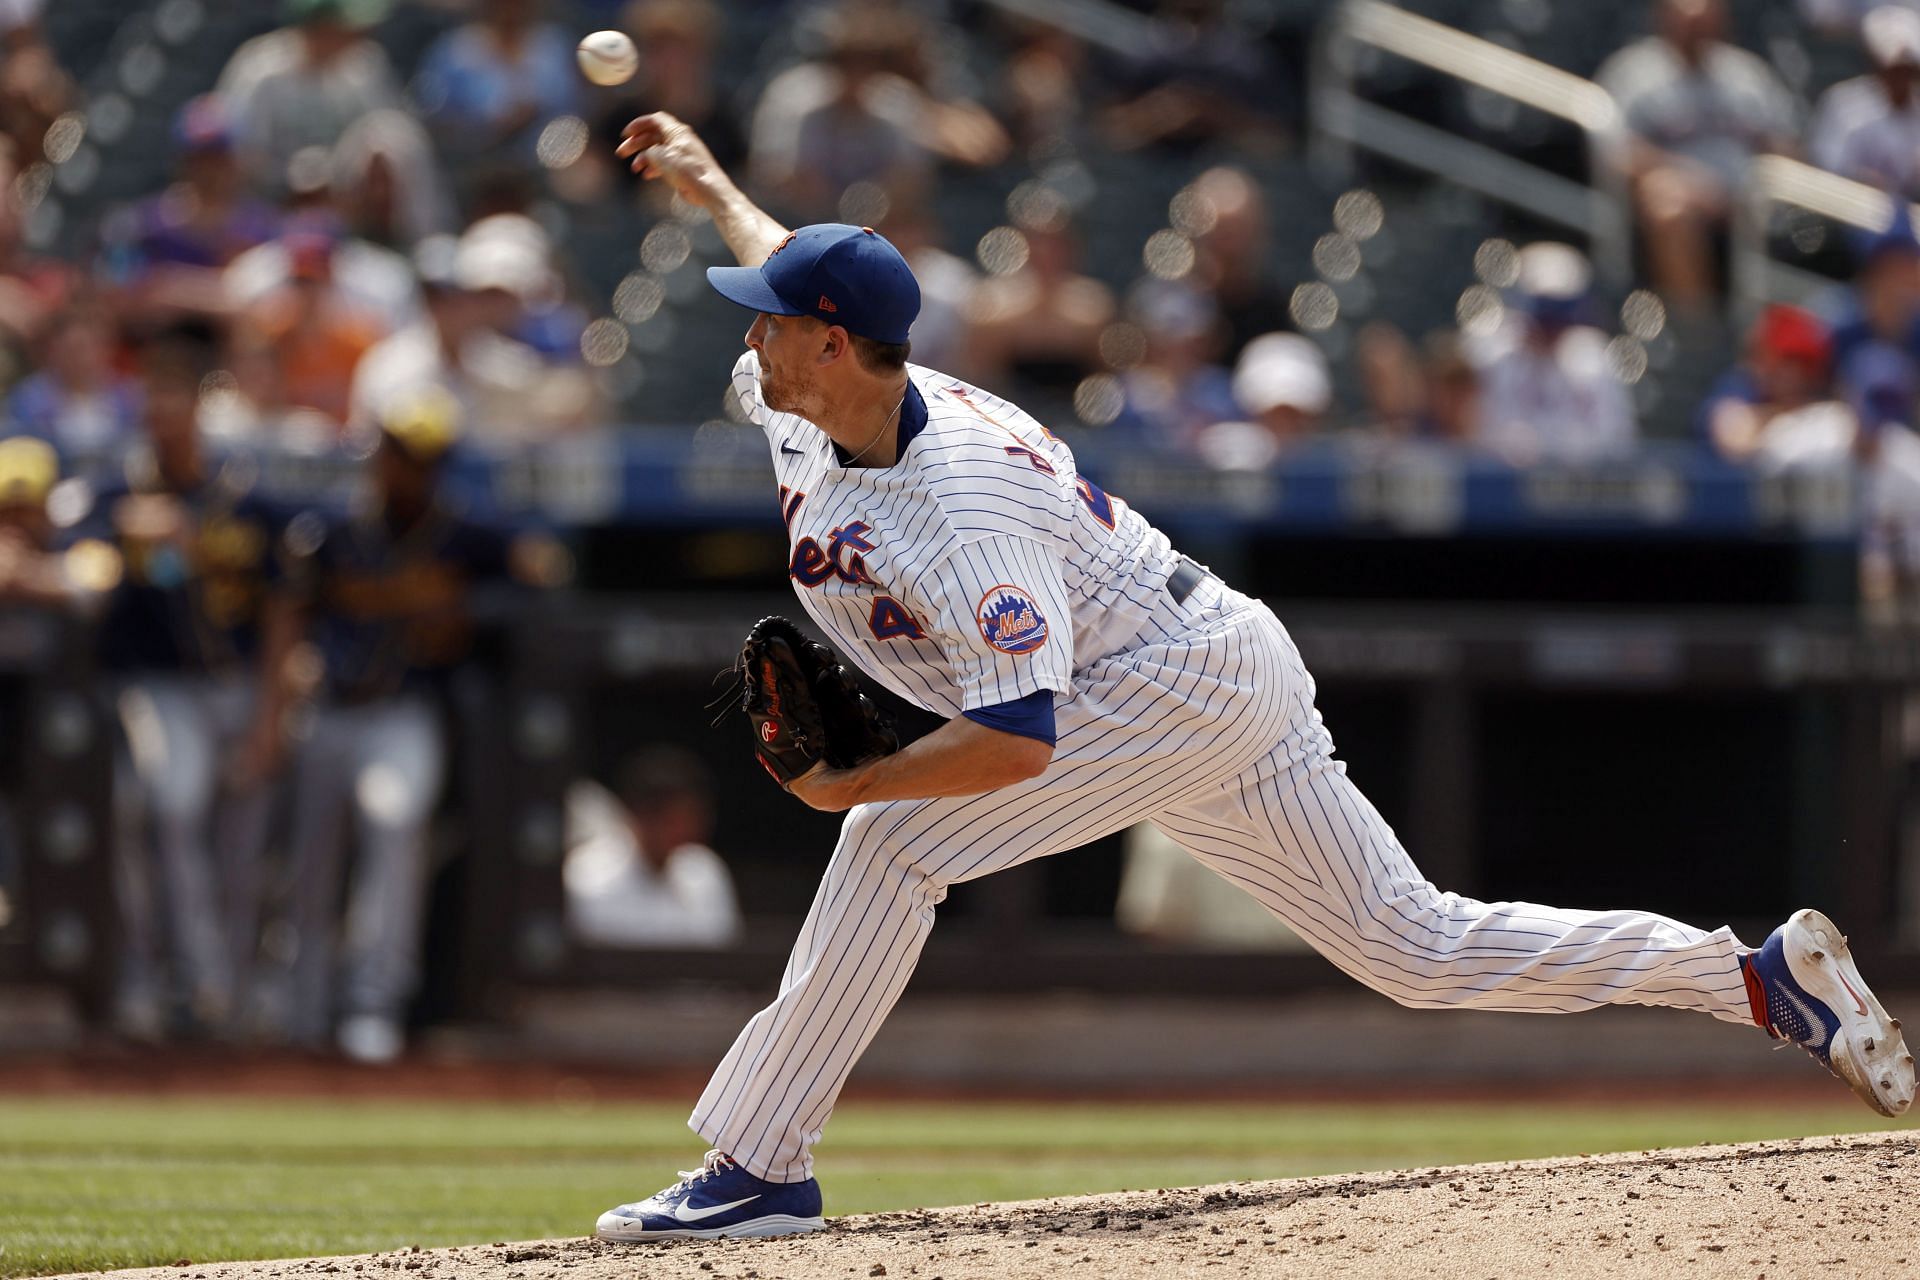 NY Mets SP Jacob deGrom could be even more dominant without a spot in the batting lineup